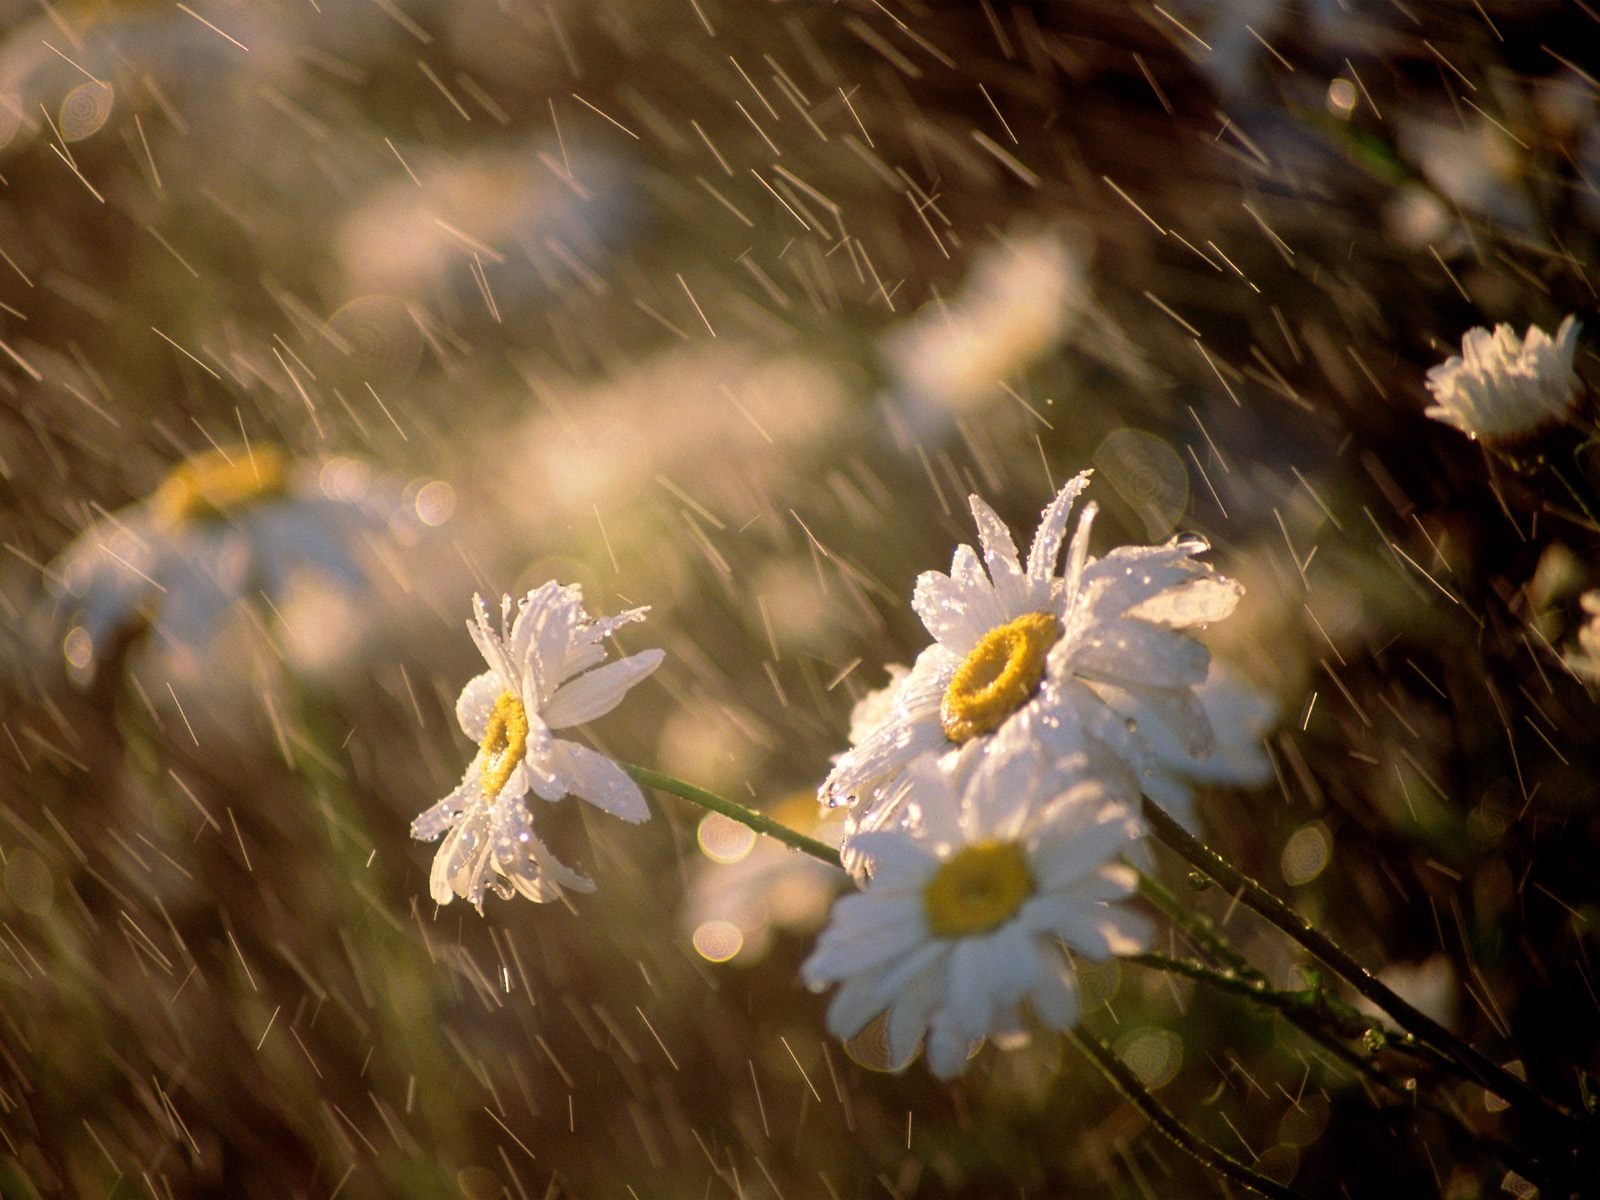 Rain Falling HD Wallpaper Pictures Image Background